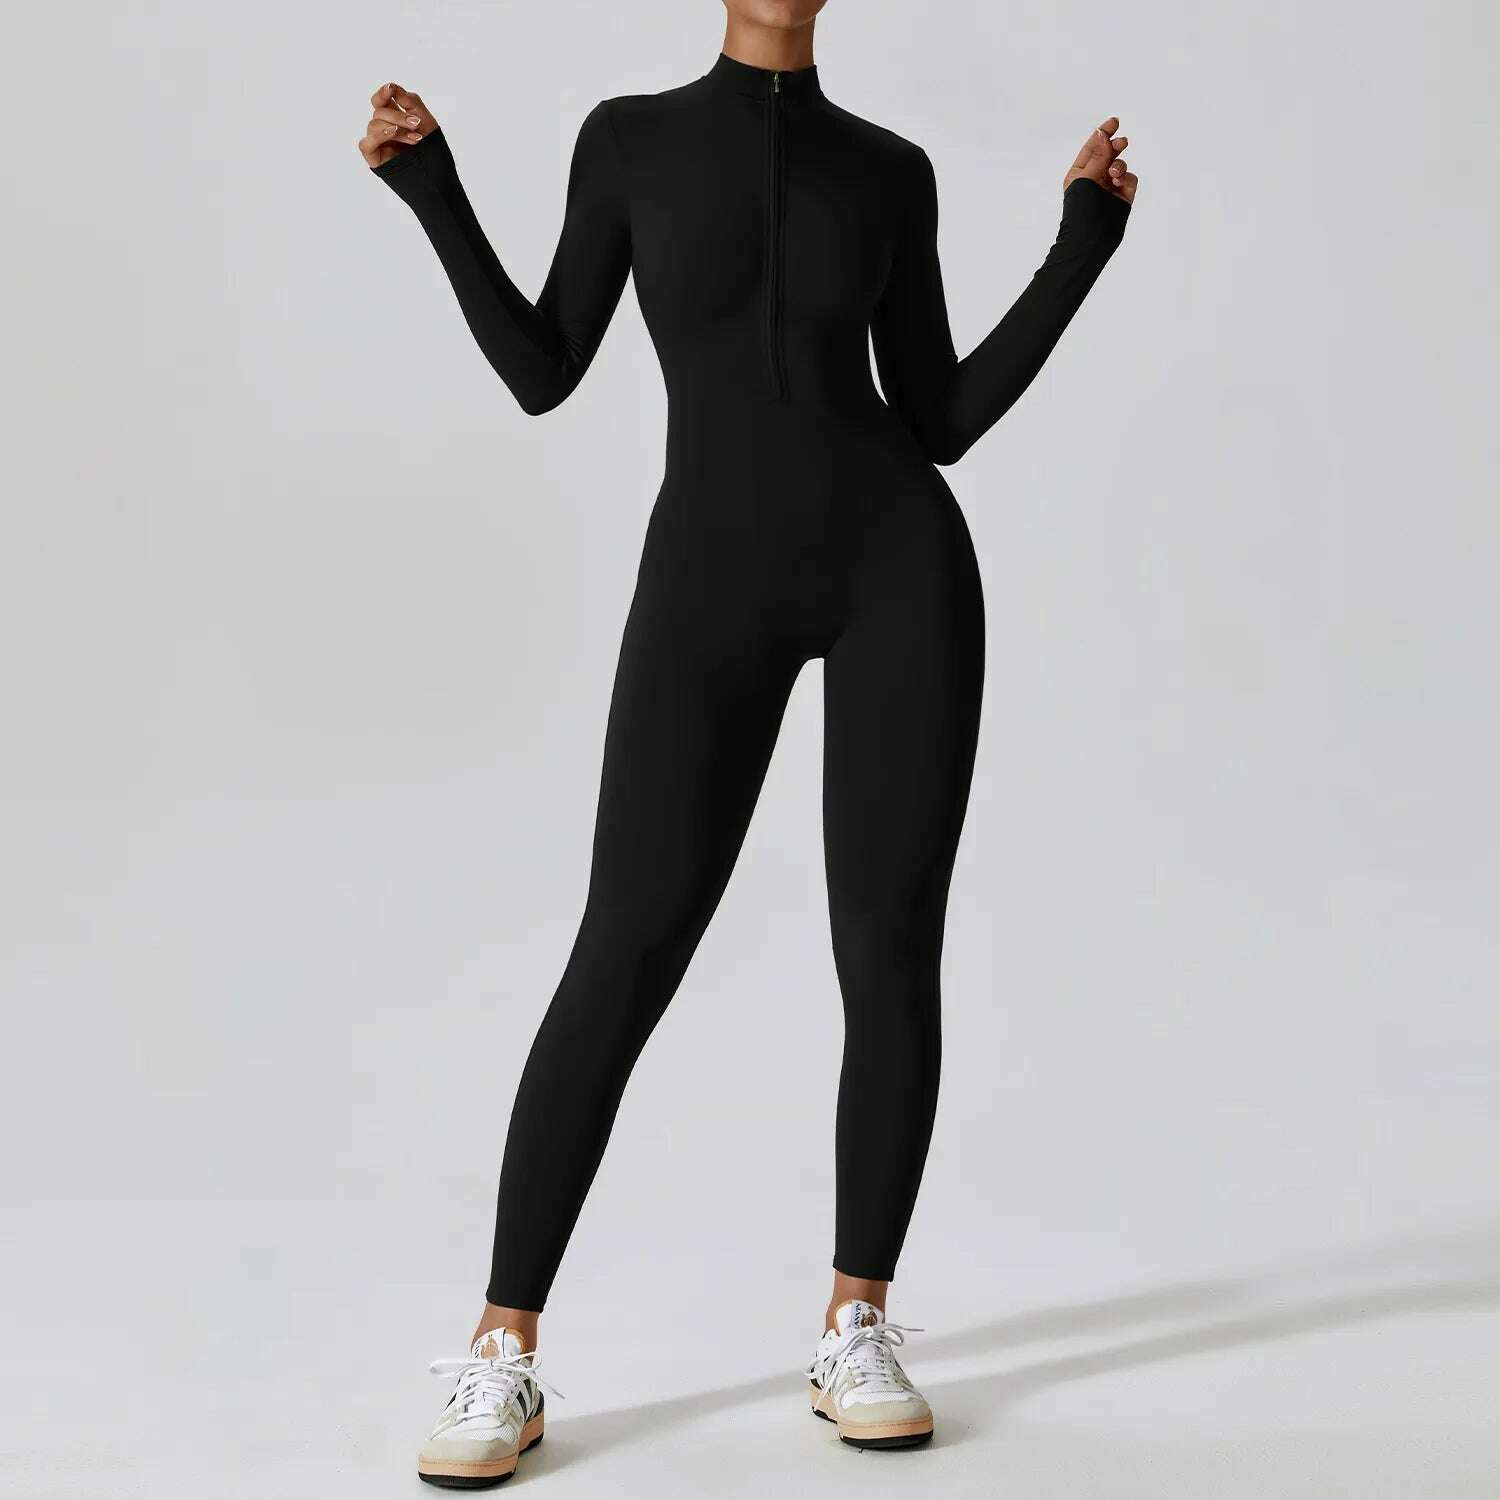 KIMLUD, Yoga Boilersuit Long Sleeved Women's Sportswear Gym Zipper Jumpsuits Workout High-intensity Fitness One-piece Skin-tight Garment, Advanced Black / S / CHINA, KIMLUD Women's Clothes